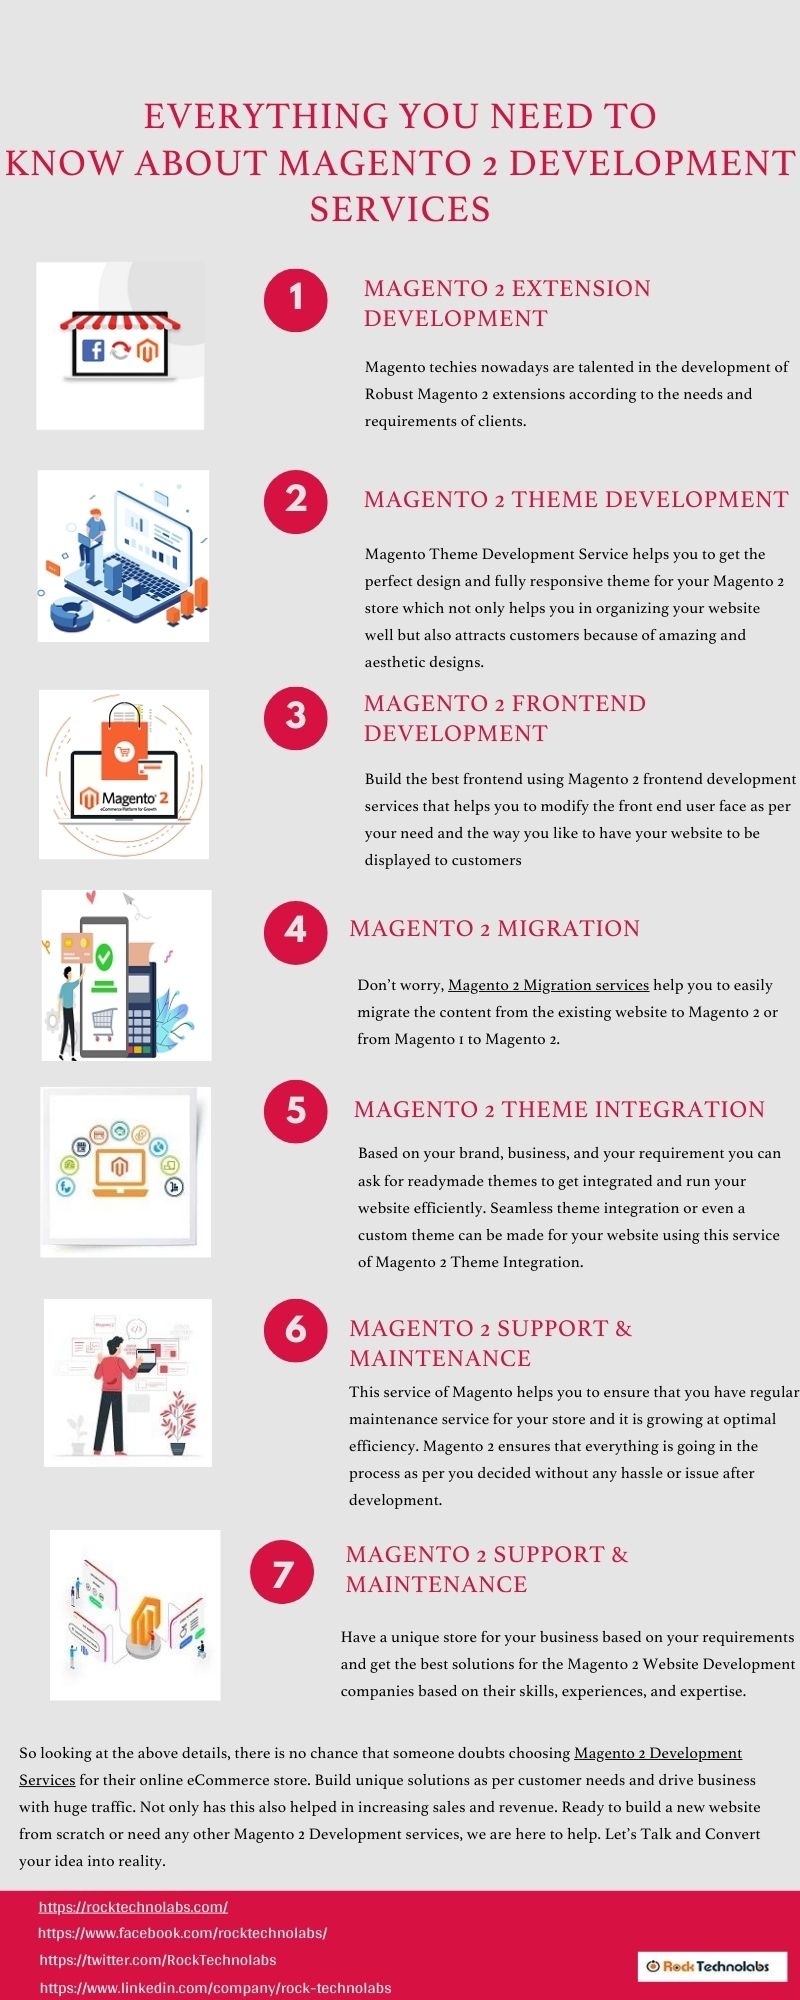 Rock Technolabs Magento News: Everything You Need To Know About Magento 2 Development Services